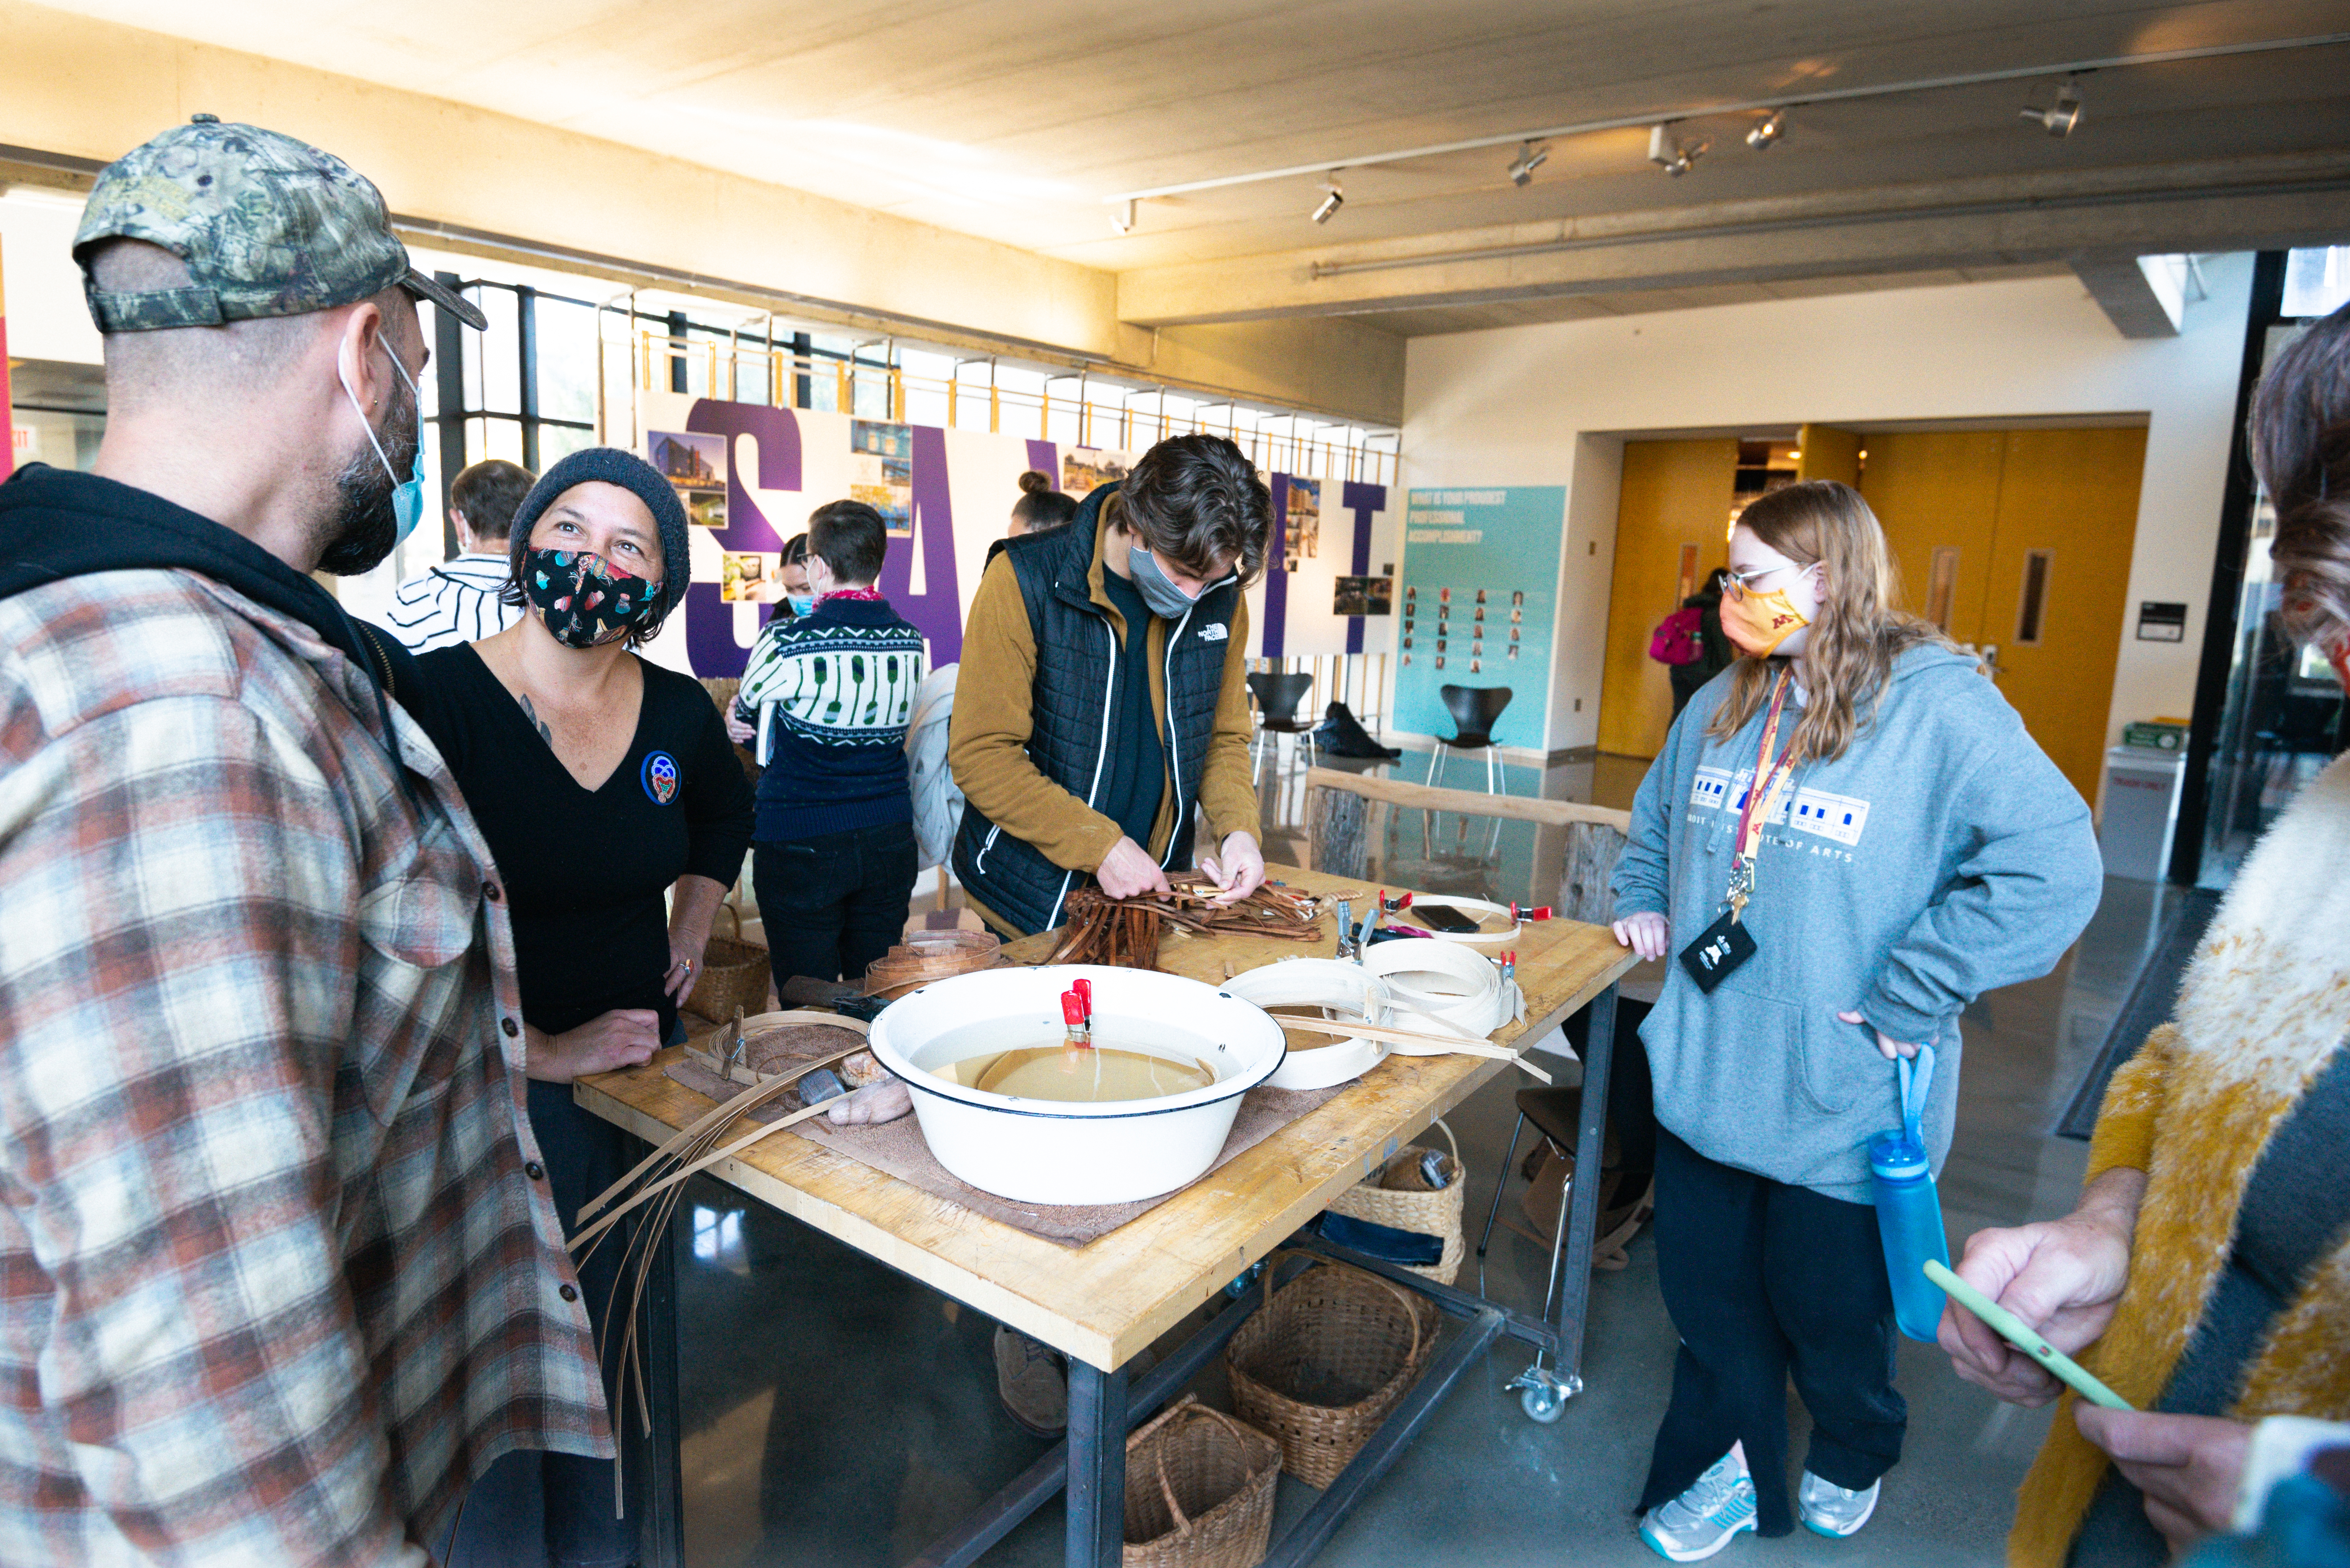 Pop-up biomaterials workshop held in HGA Gallery in Rapson and hosted by Kusske Design Initiative and the Dare to Repair seminar led by April Stone, who is an indigenous artist from Wisconsin who creates baskets from local black ash that that she harvests and processes herself.